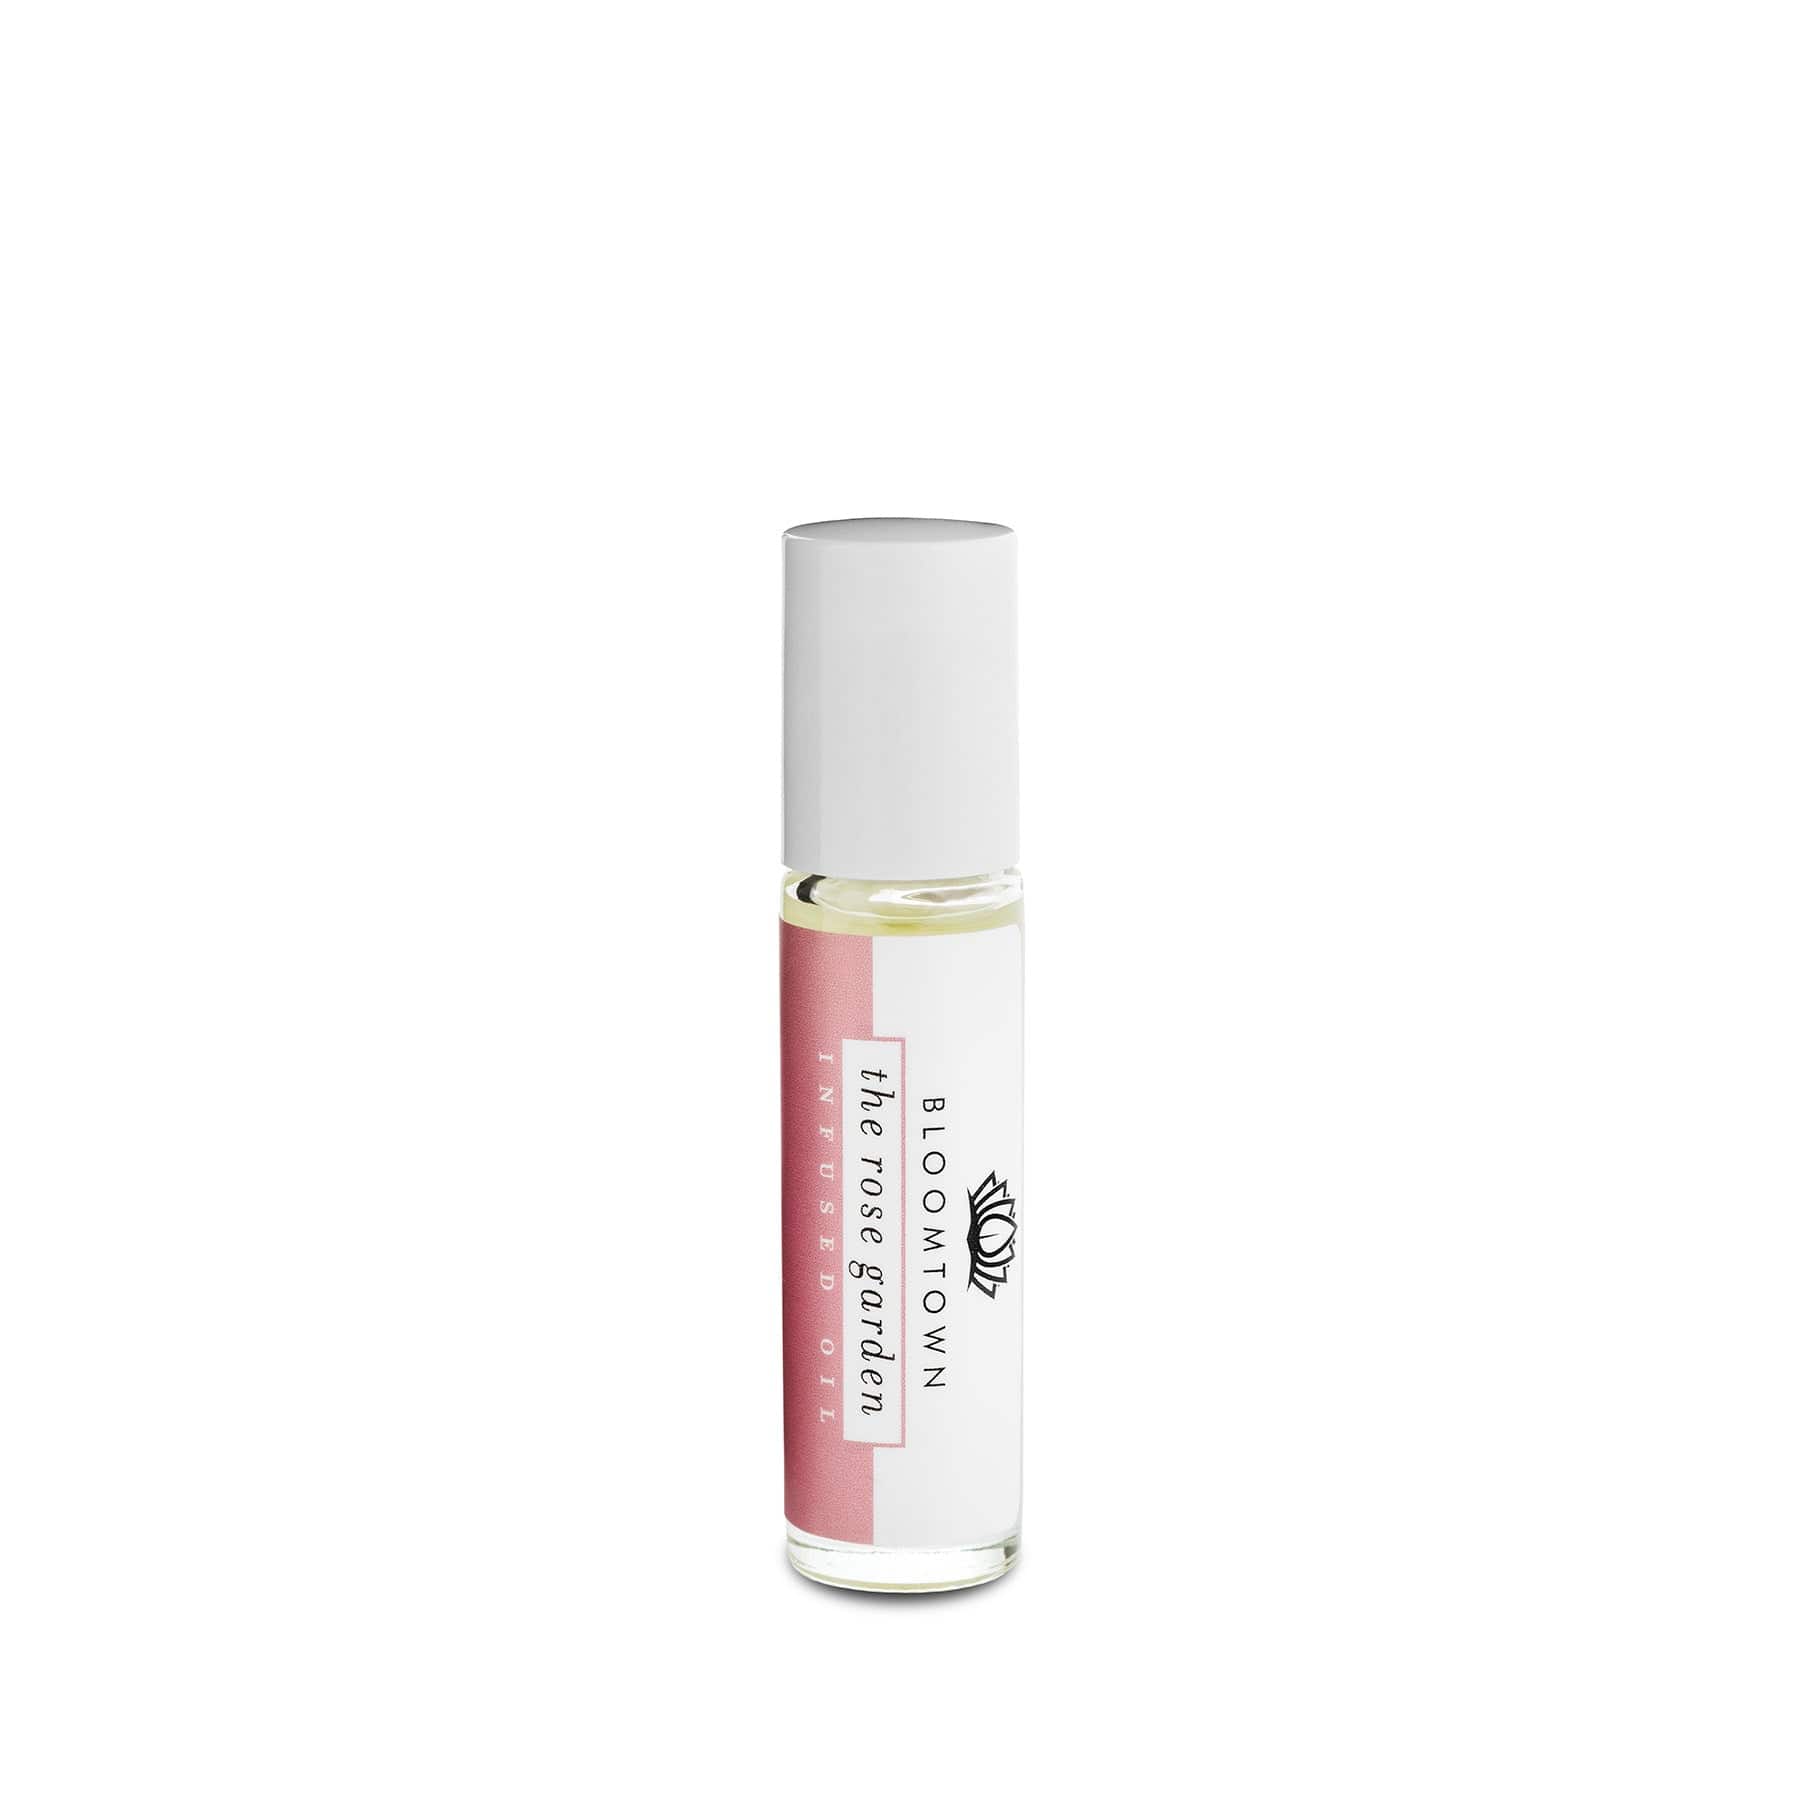 Alt text: Roll-on perfume oil in a glass bottle with a white cap and labeled "The Rose Garden" by Bloomtown, isolated on a white background.